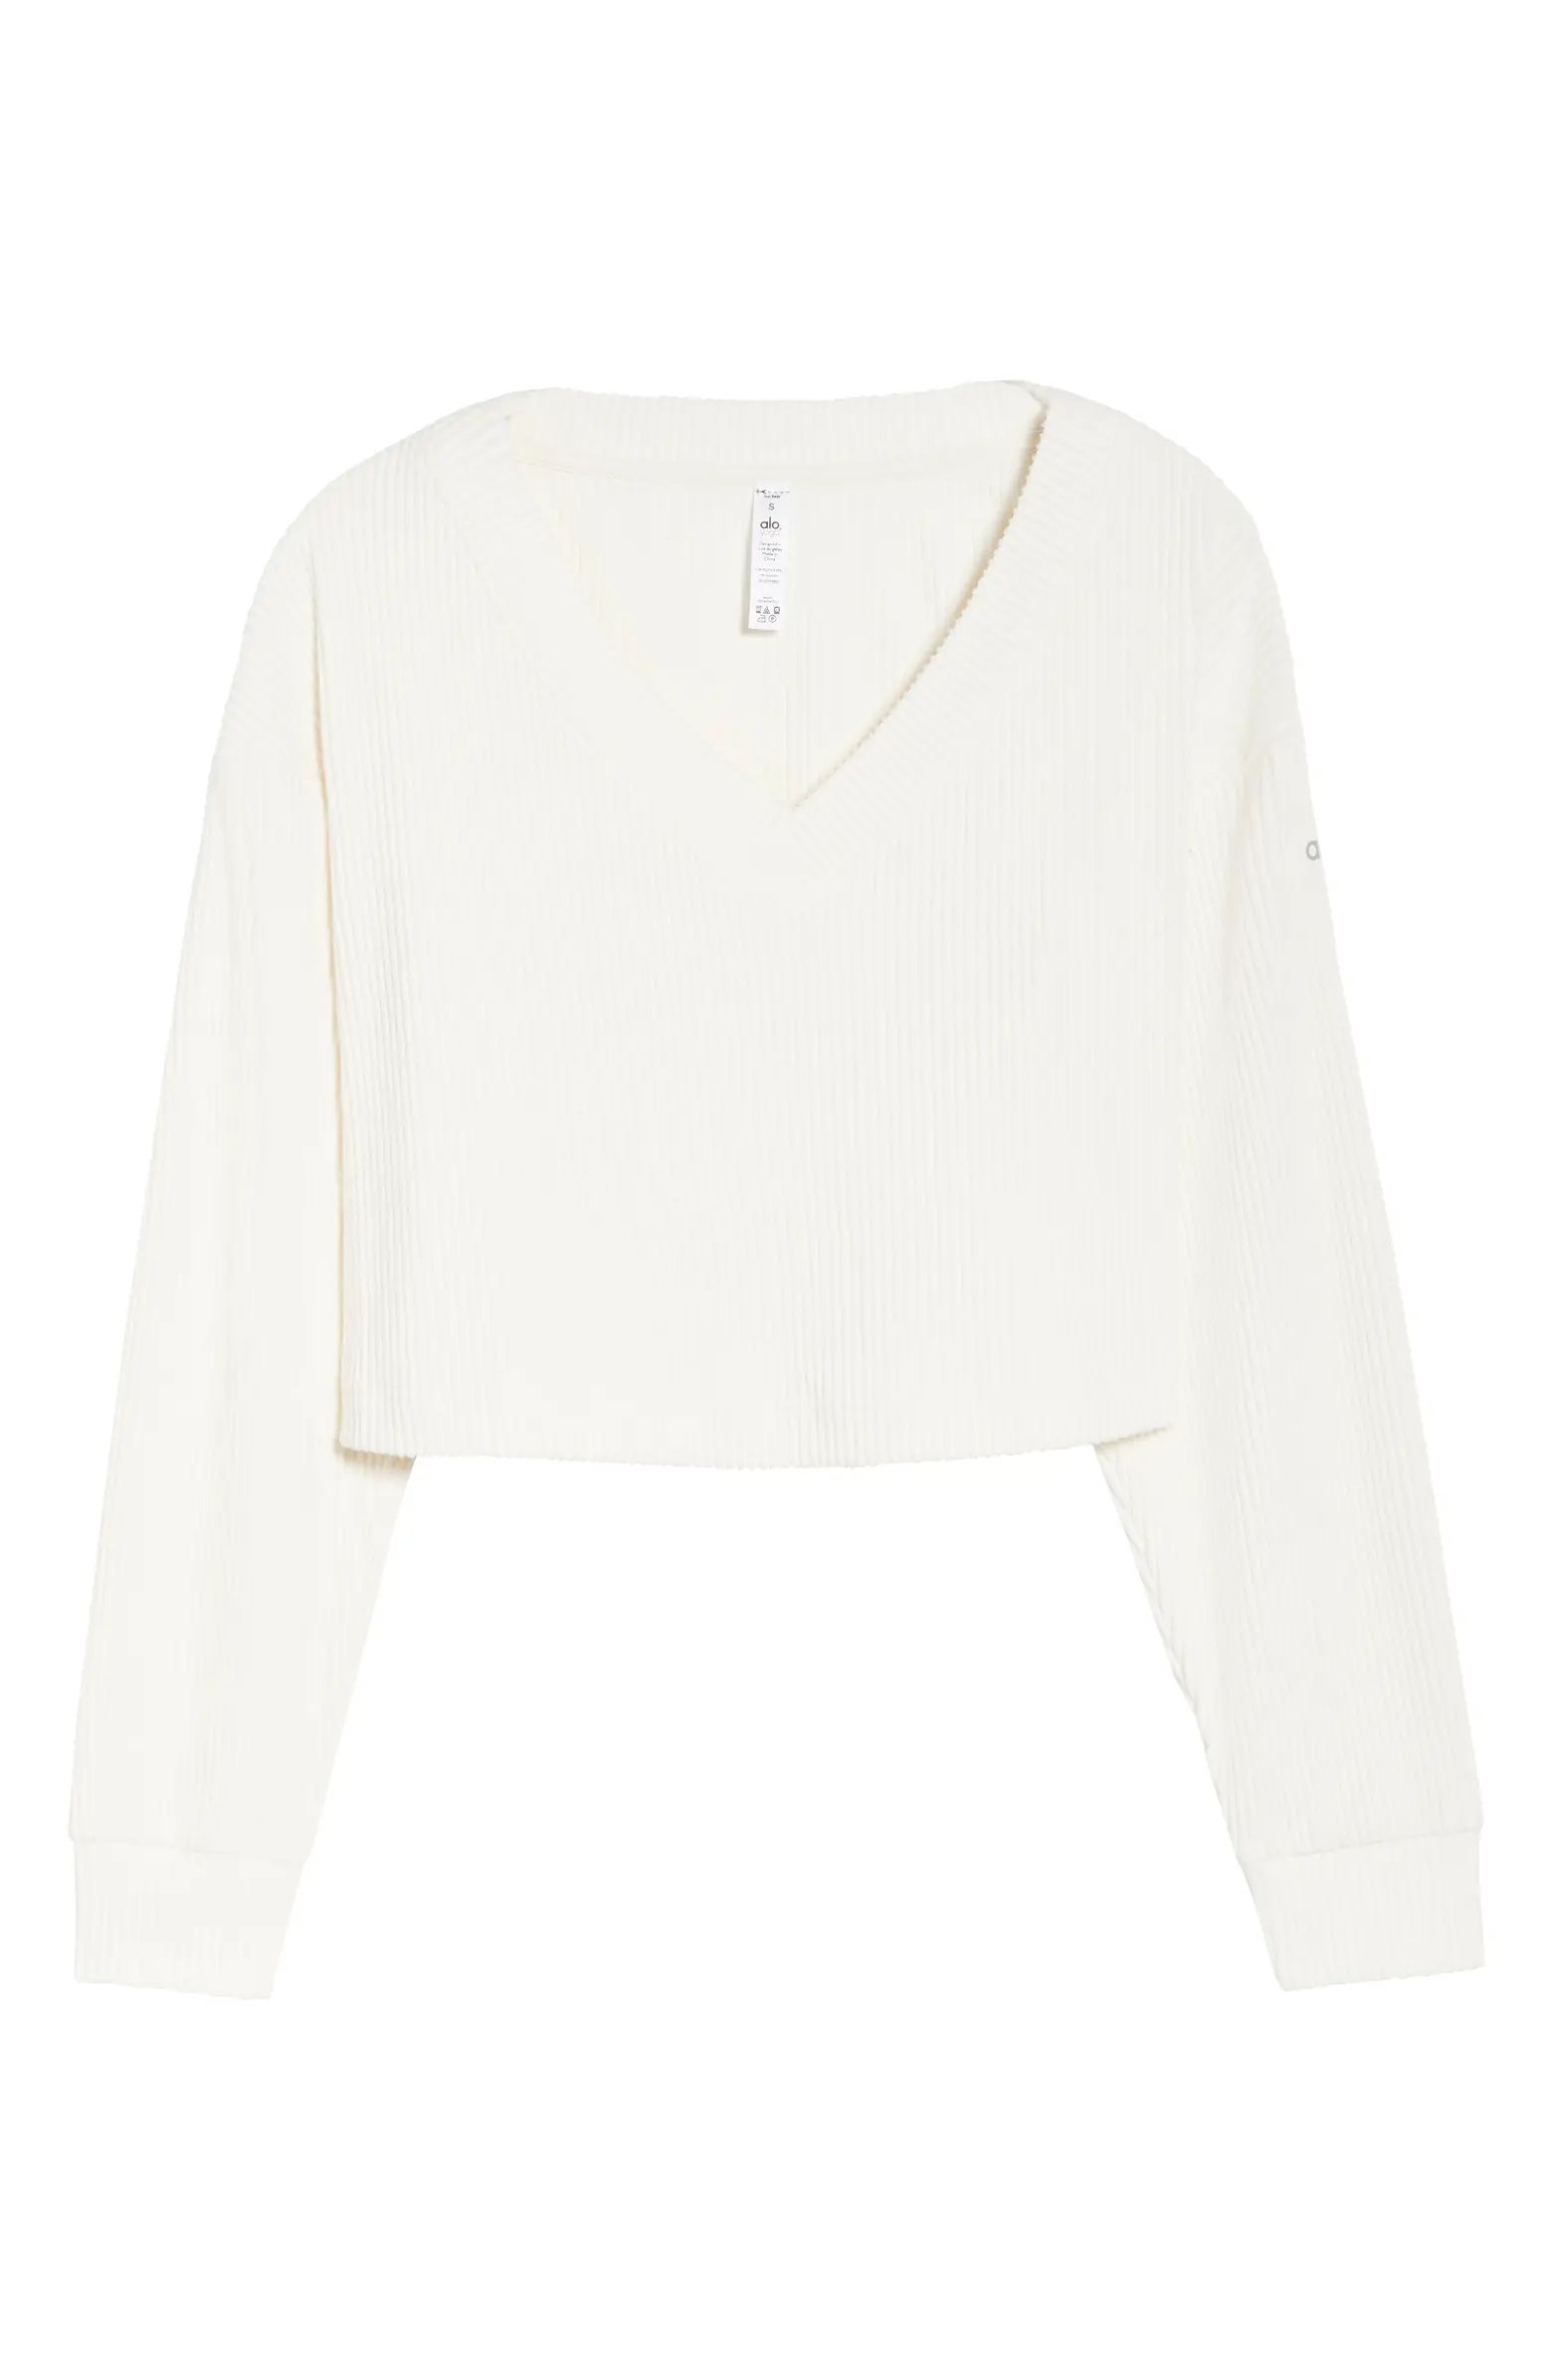 Alo Muse Ribbed Crop Pullover | Nordstrom | Nordstrom